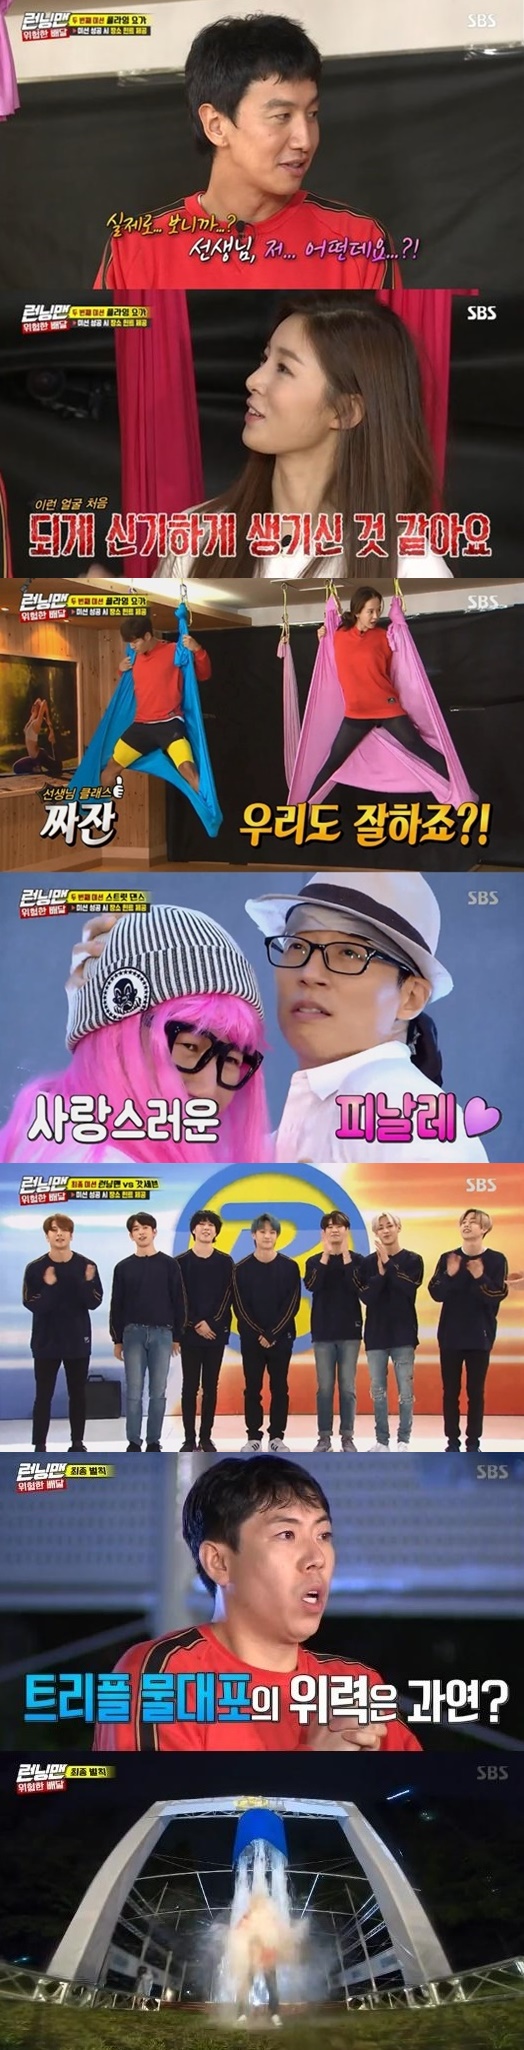 The surprise GOT7 matchup with Running Man was the best one minute.According to Nielsen Korea, the ratings agency SBS Running Man, which was broadcast on September 16, recorded 5.3% of target audience ratings (based on households in the metropolitan area) between 20 and 49 years old (hereinafter referred to as 2049), which is considered an important indicator of major advertising officials, and lightly beat the same time zone broadcast Masked Wang, and the highest audience rating per minute rose to 9.3%, which is close to 10%.On this day, the broadcast was featured as a special feature of Dangerous Delivery Race, and Yoo Seung-ok, Jay Black & Mari and GOT7 appeared as special guests.The members of Running Man were divided into a street dance team and a flying yoga team to challenge the mission.Jay Black & Marie passed on the fantastic dance skills to Yoo Jae-Suk, Jeon So-min and Haha, and encouraged them to do well, and eventually completed the dance mission with the street dance team including hole Ji Suk-jin.Yoga team was bright with the role of Yoo Seung-ok and Lee Kwang-soo as Yoga teacher.Yoo Seung-ok told Lee Kwang-soo, It looks amazing.Lee Kwang-soo showed off his tit-for-tat chemistry by doubting the yoga skills of Yoo Seung-ok.Yoo Seung-ok declared that he could not Lee Kwang-soo but Kim Jong-guk forced Lee Kwang-soo to finish the mission.The best one minute of the broadcast was a confrontation between GOT7, who appeared in surprise with members of Running Man.The GOT7 won Jacksons performance in the first showdown Long Jump, but lost the second and third games and the Running Man members won.This scene recorded the highest audience rating of 9.3% at the moment, and after the broadcast, Yoo Seung-ok, Jay Black & Mari and GOT7 came up and down the real-time search query and received the attention of viewers.Park Su-in